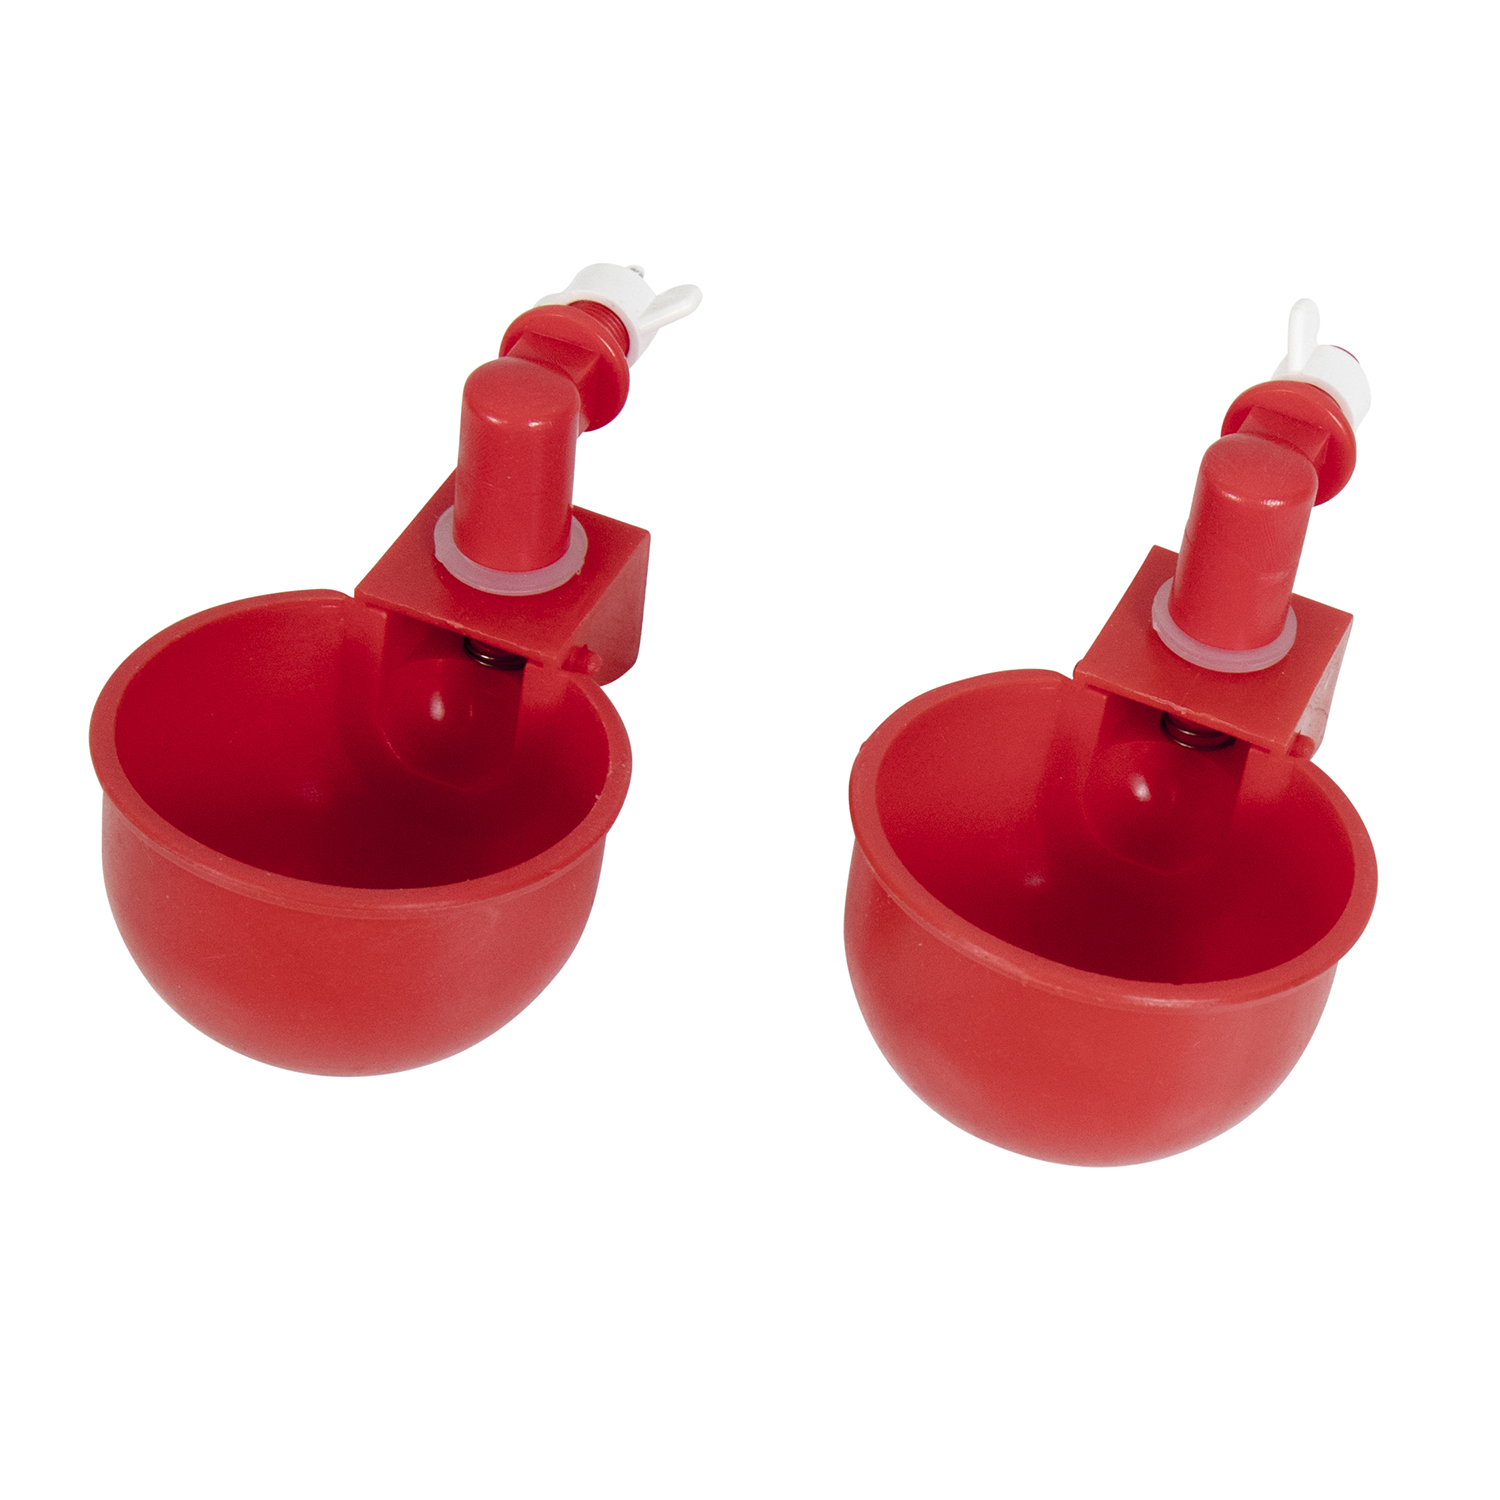 Poultry Waterer - Gravity Fed Cup for Mobile Chicken Waterers - Set of 2